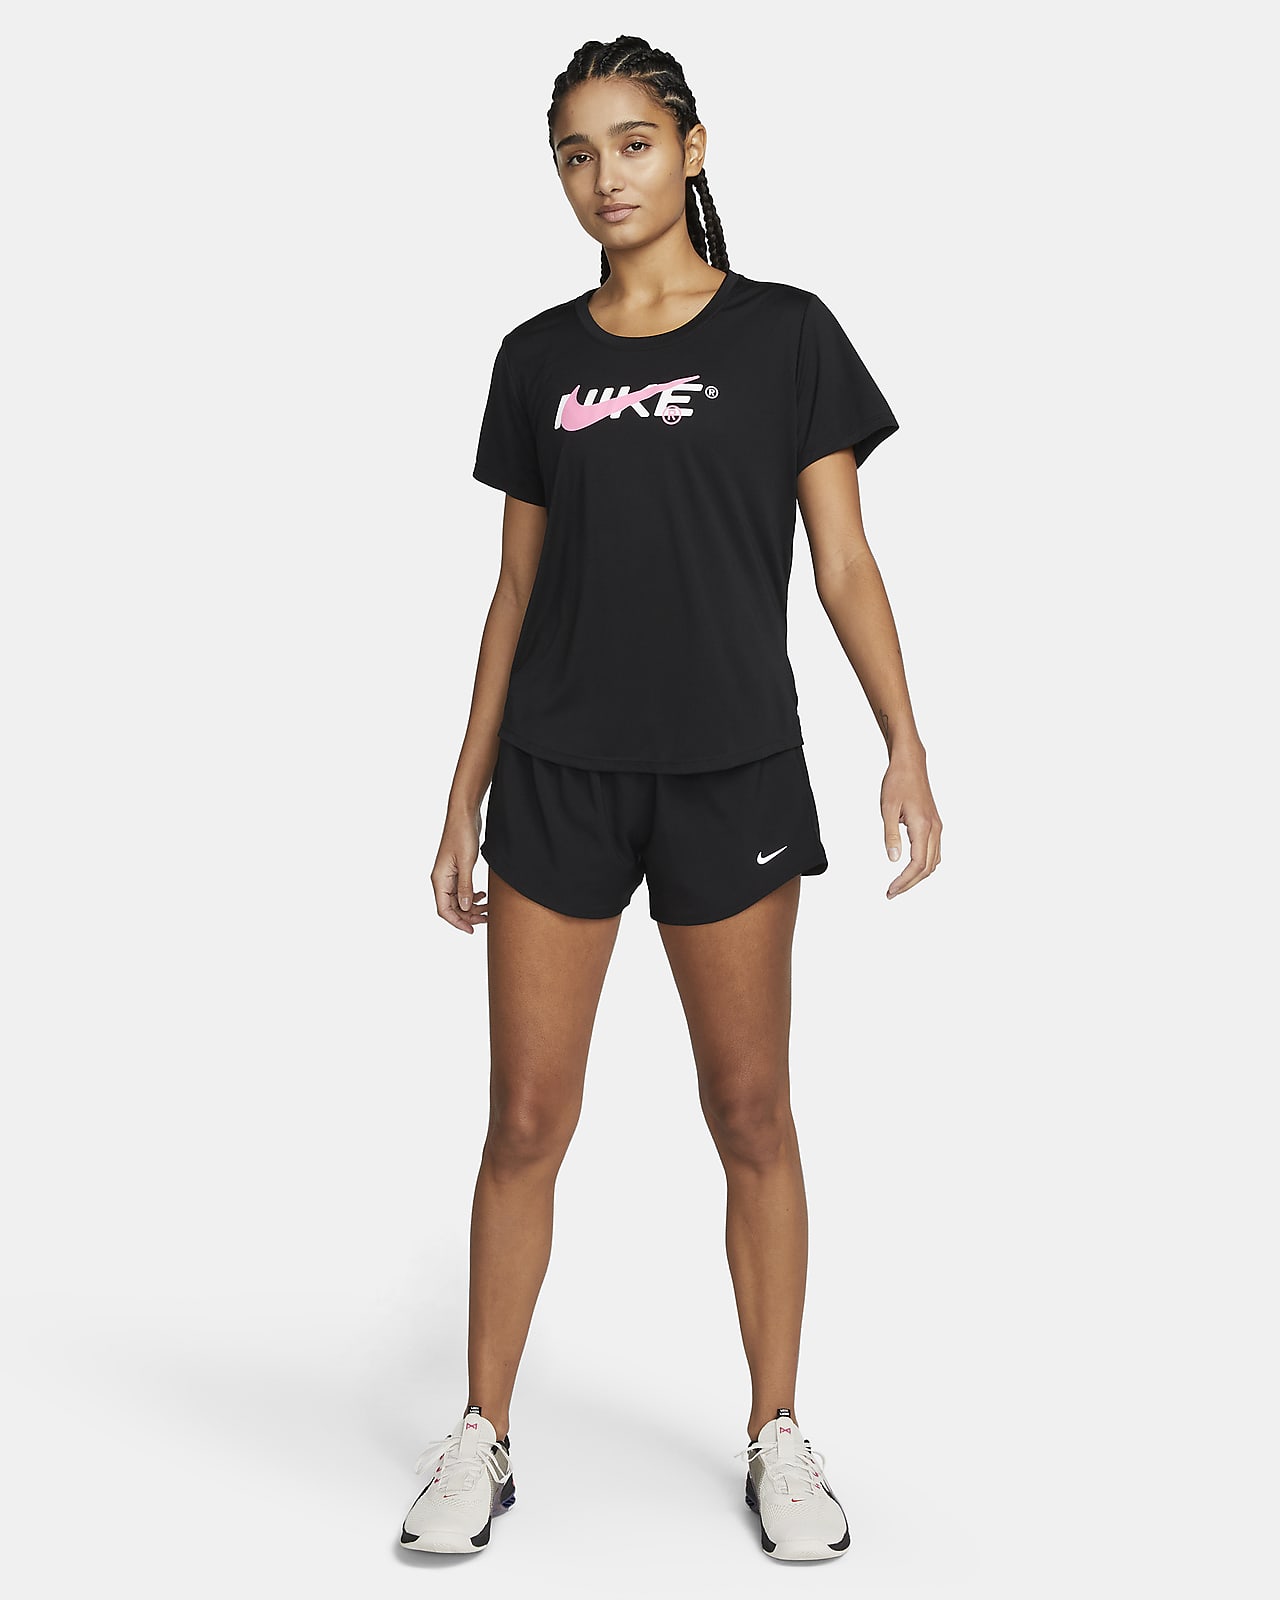 Nike One Women's Dri-FIT Ultra High-Waisted 8cm (approx.) Brief-Lined Shorts.  Nike CA